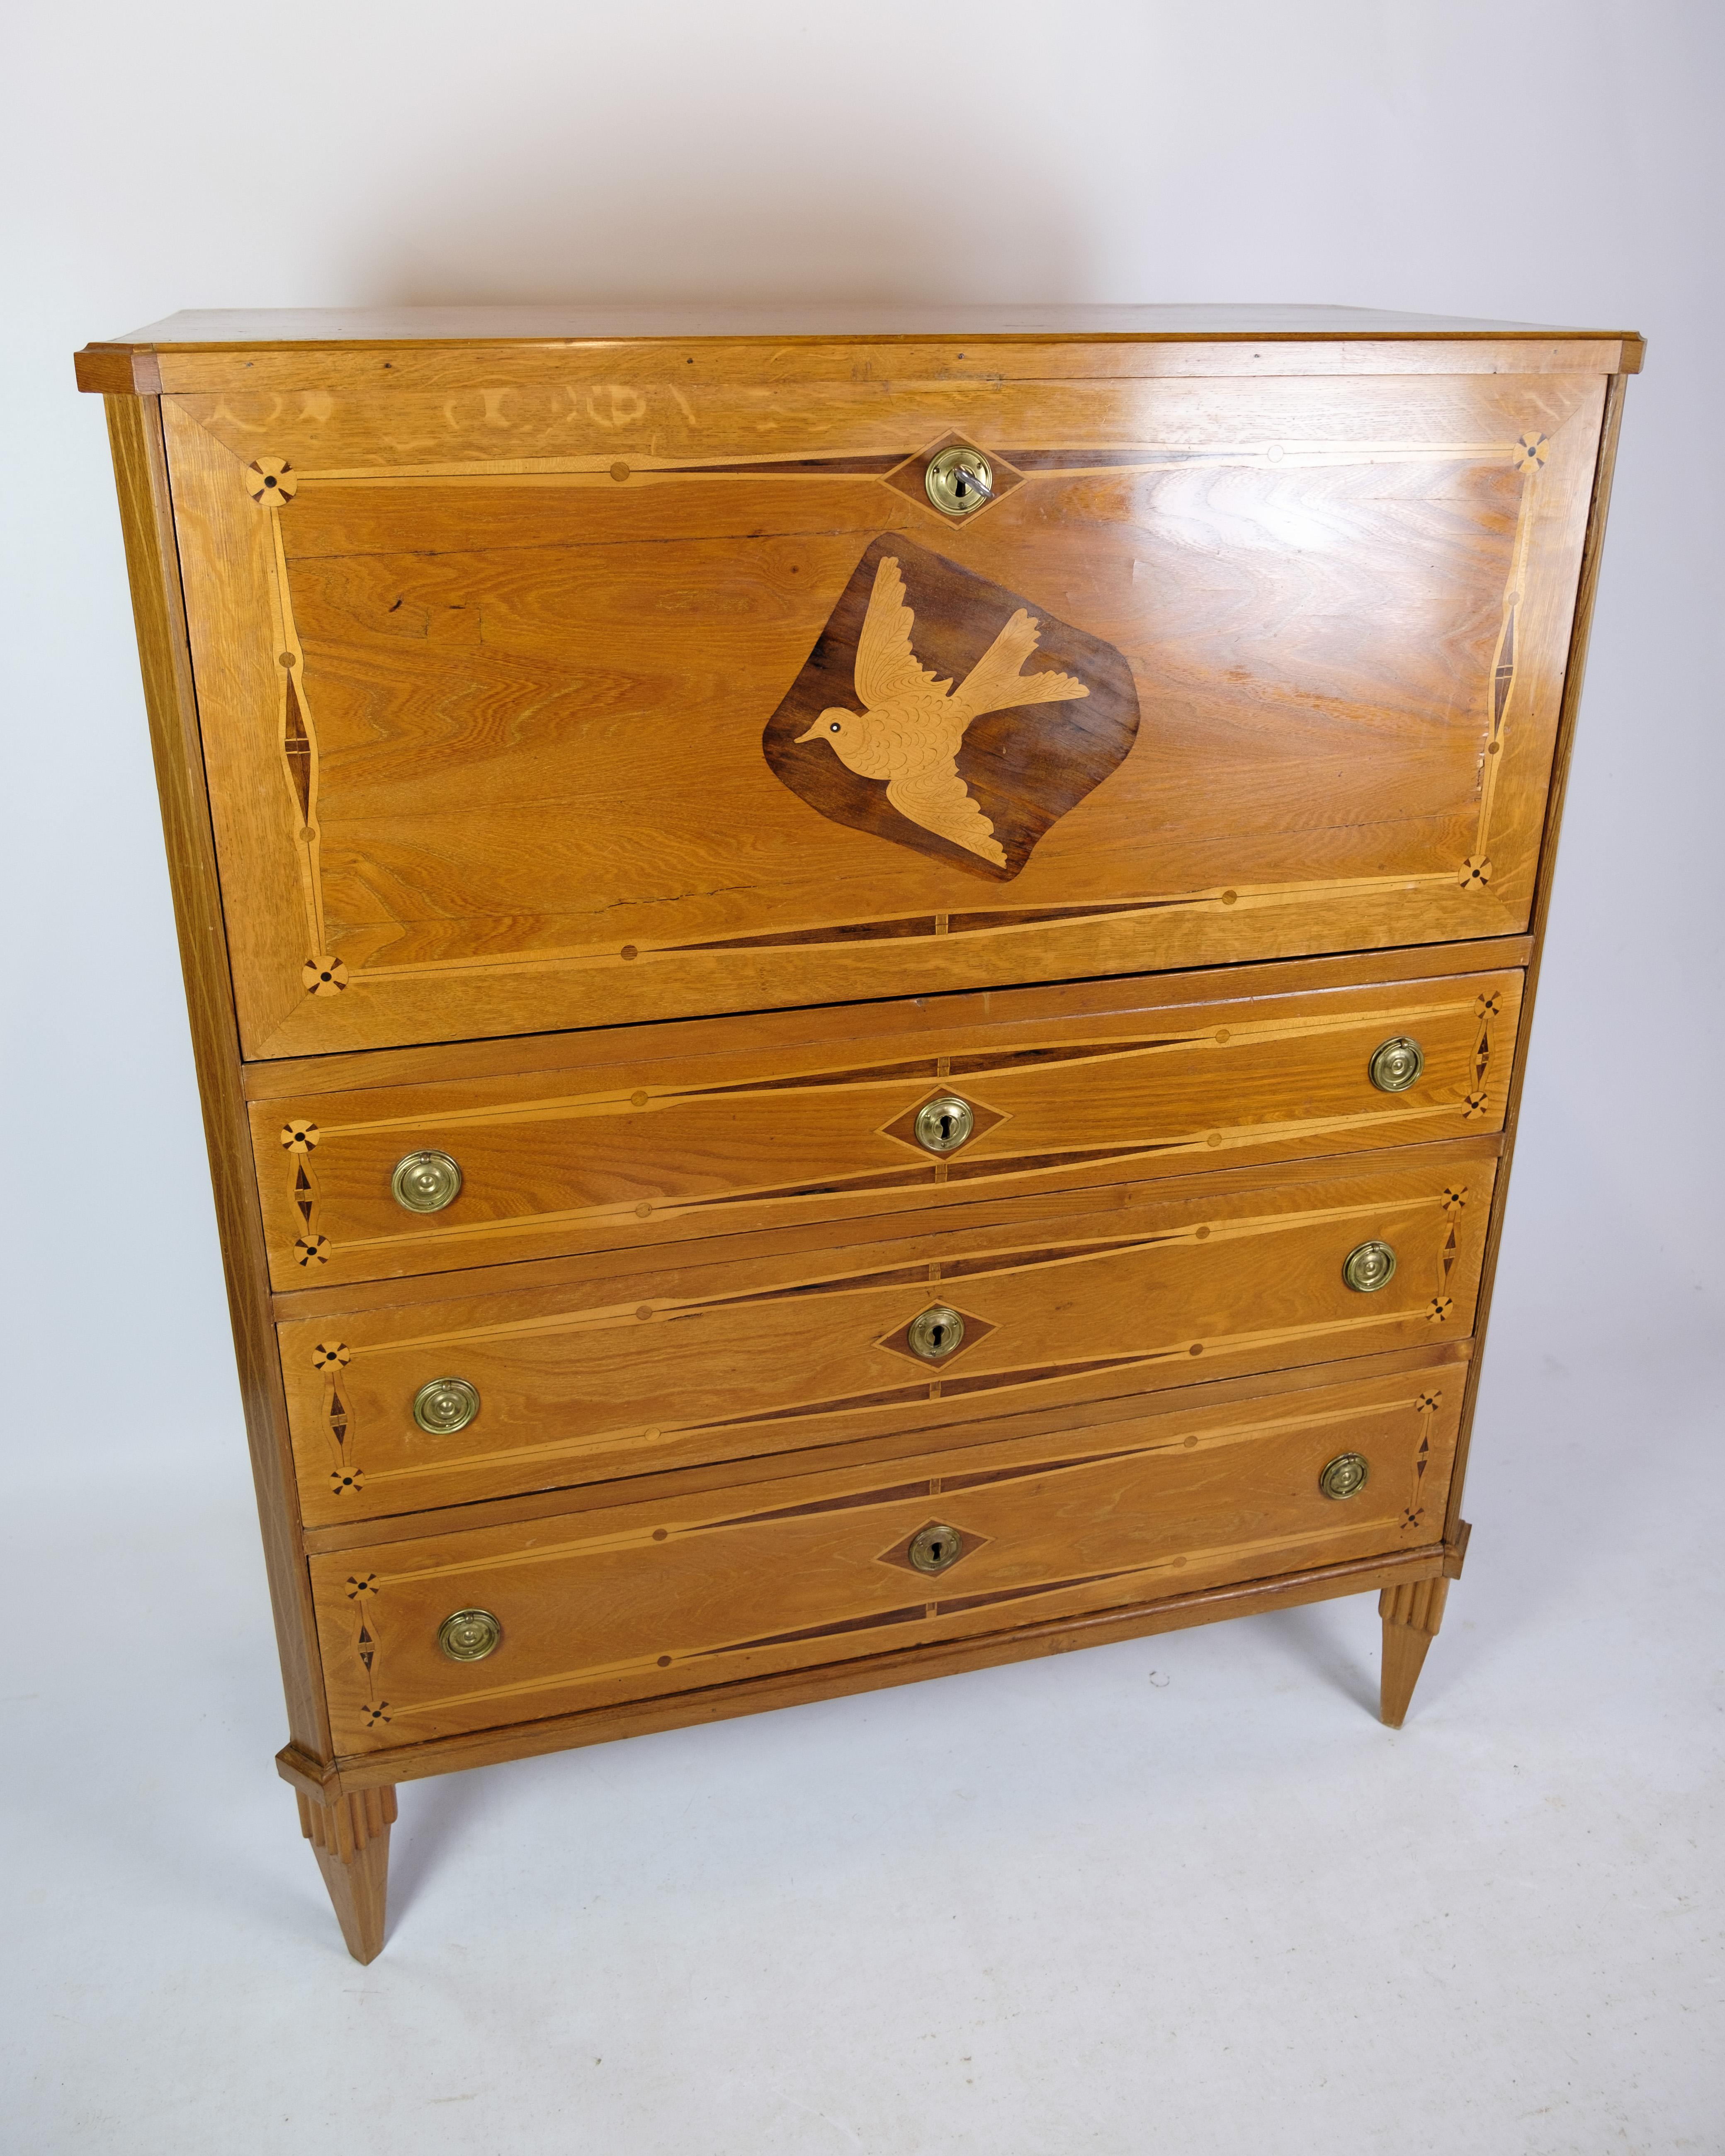 Secretary in Mahogany With Inlaid wood and Brass Handles from the 1790s For Sale 2